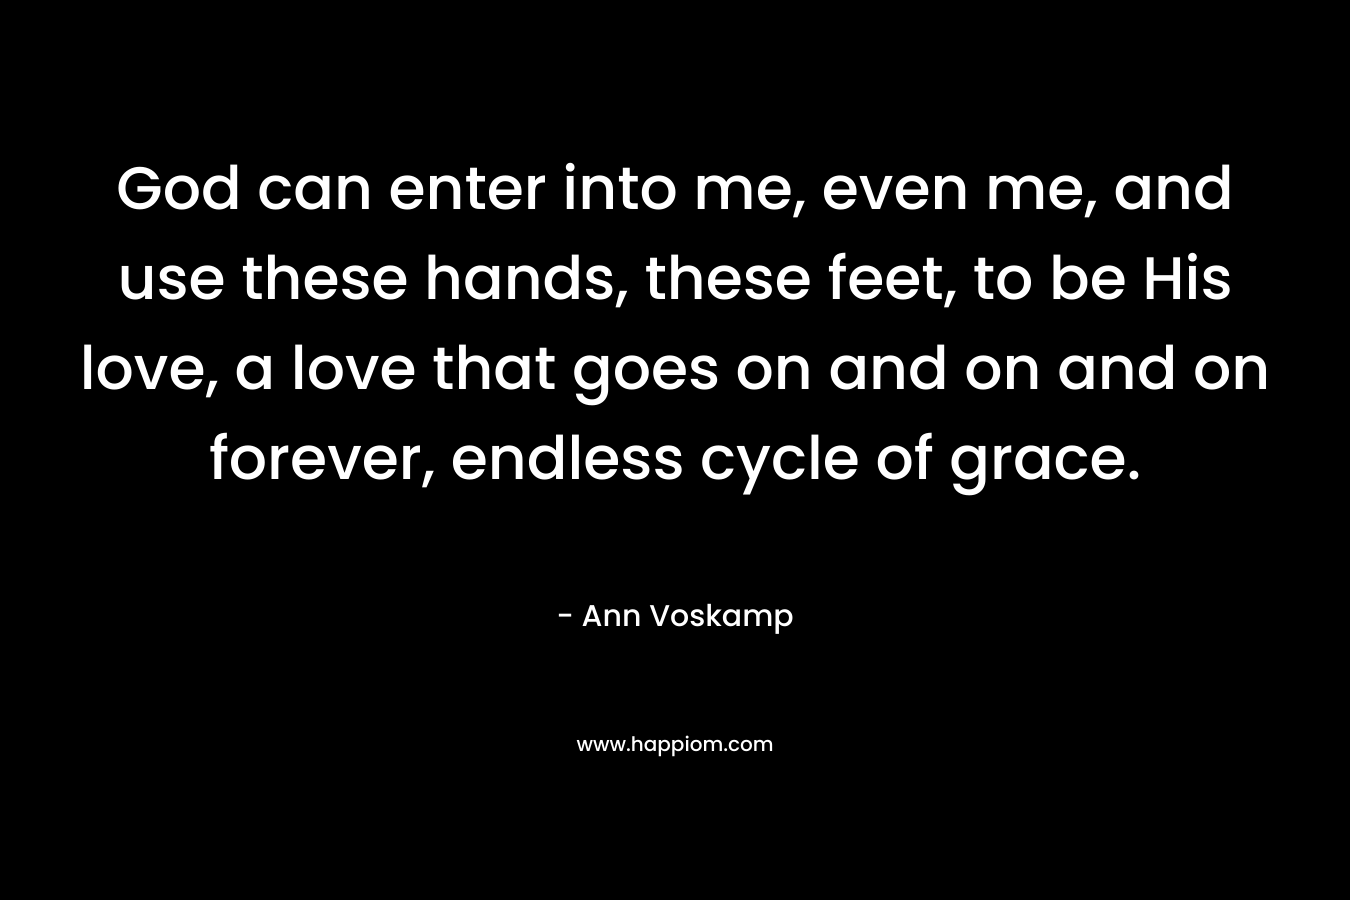 God can enter into me, even me, and use these hands, these feet, to be His love, a love that goes on and on and on forever, endless cycle of grace. – Ann Voskamp